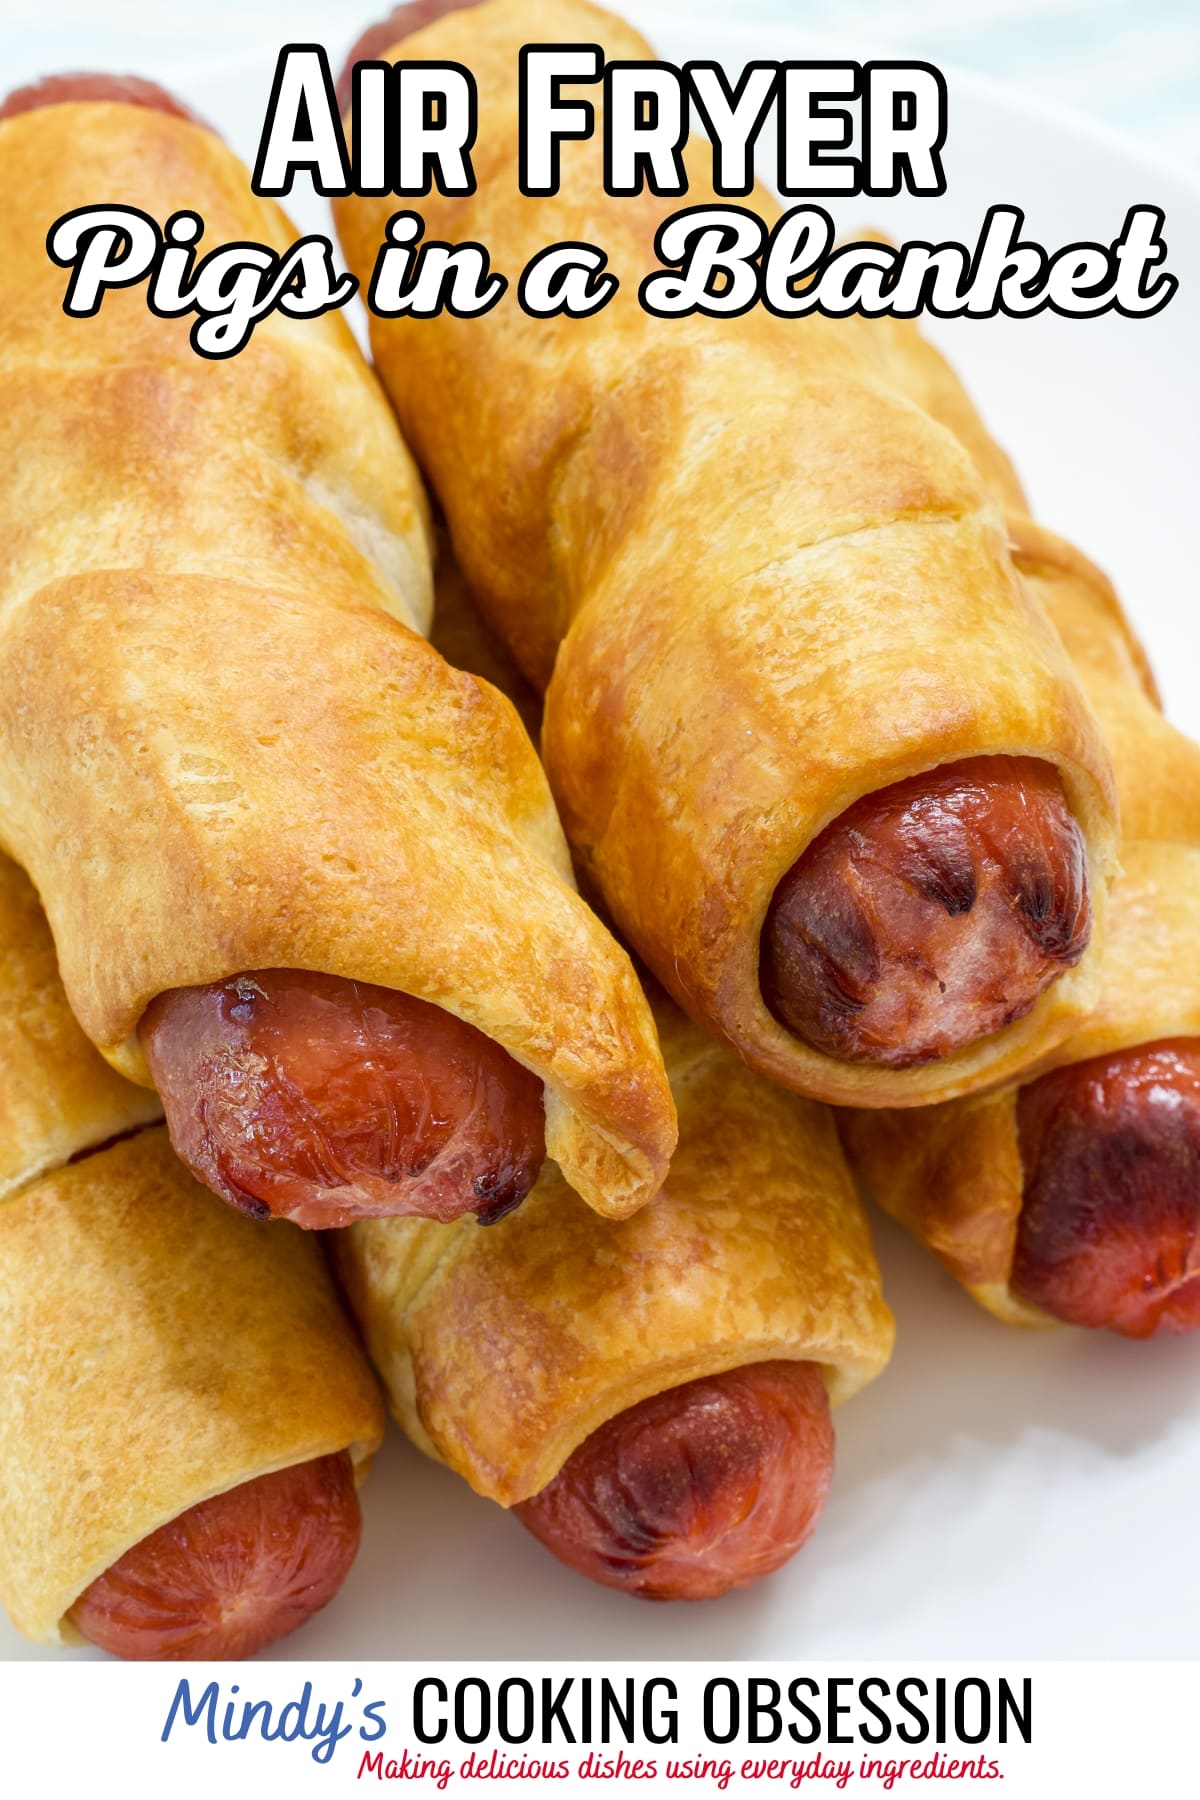 Try our Air Fryer Pigs in a Blanket Recipe (cooks in 5 mins!) Enjoy quick perfection that's great for snacking. Elevate your treats today! via @mindyscookingobsession